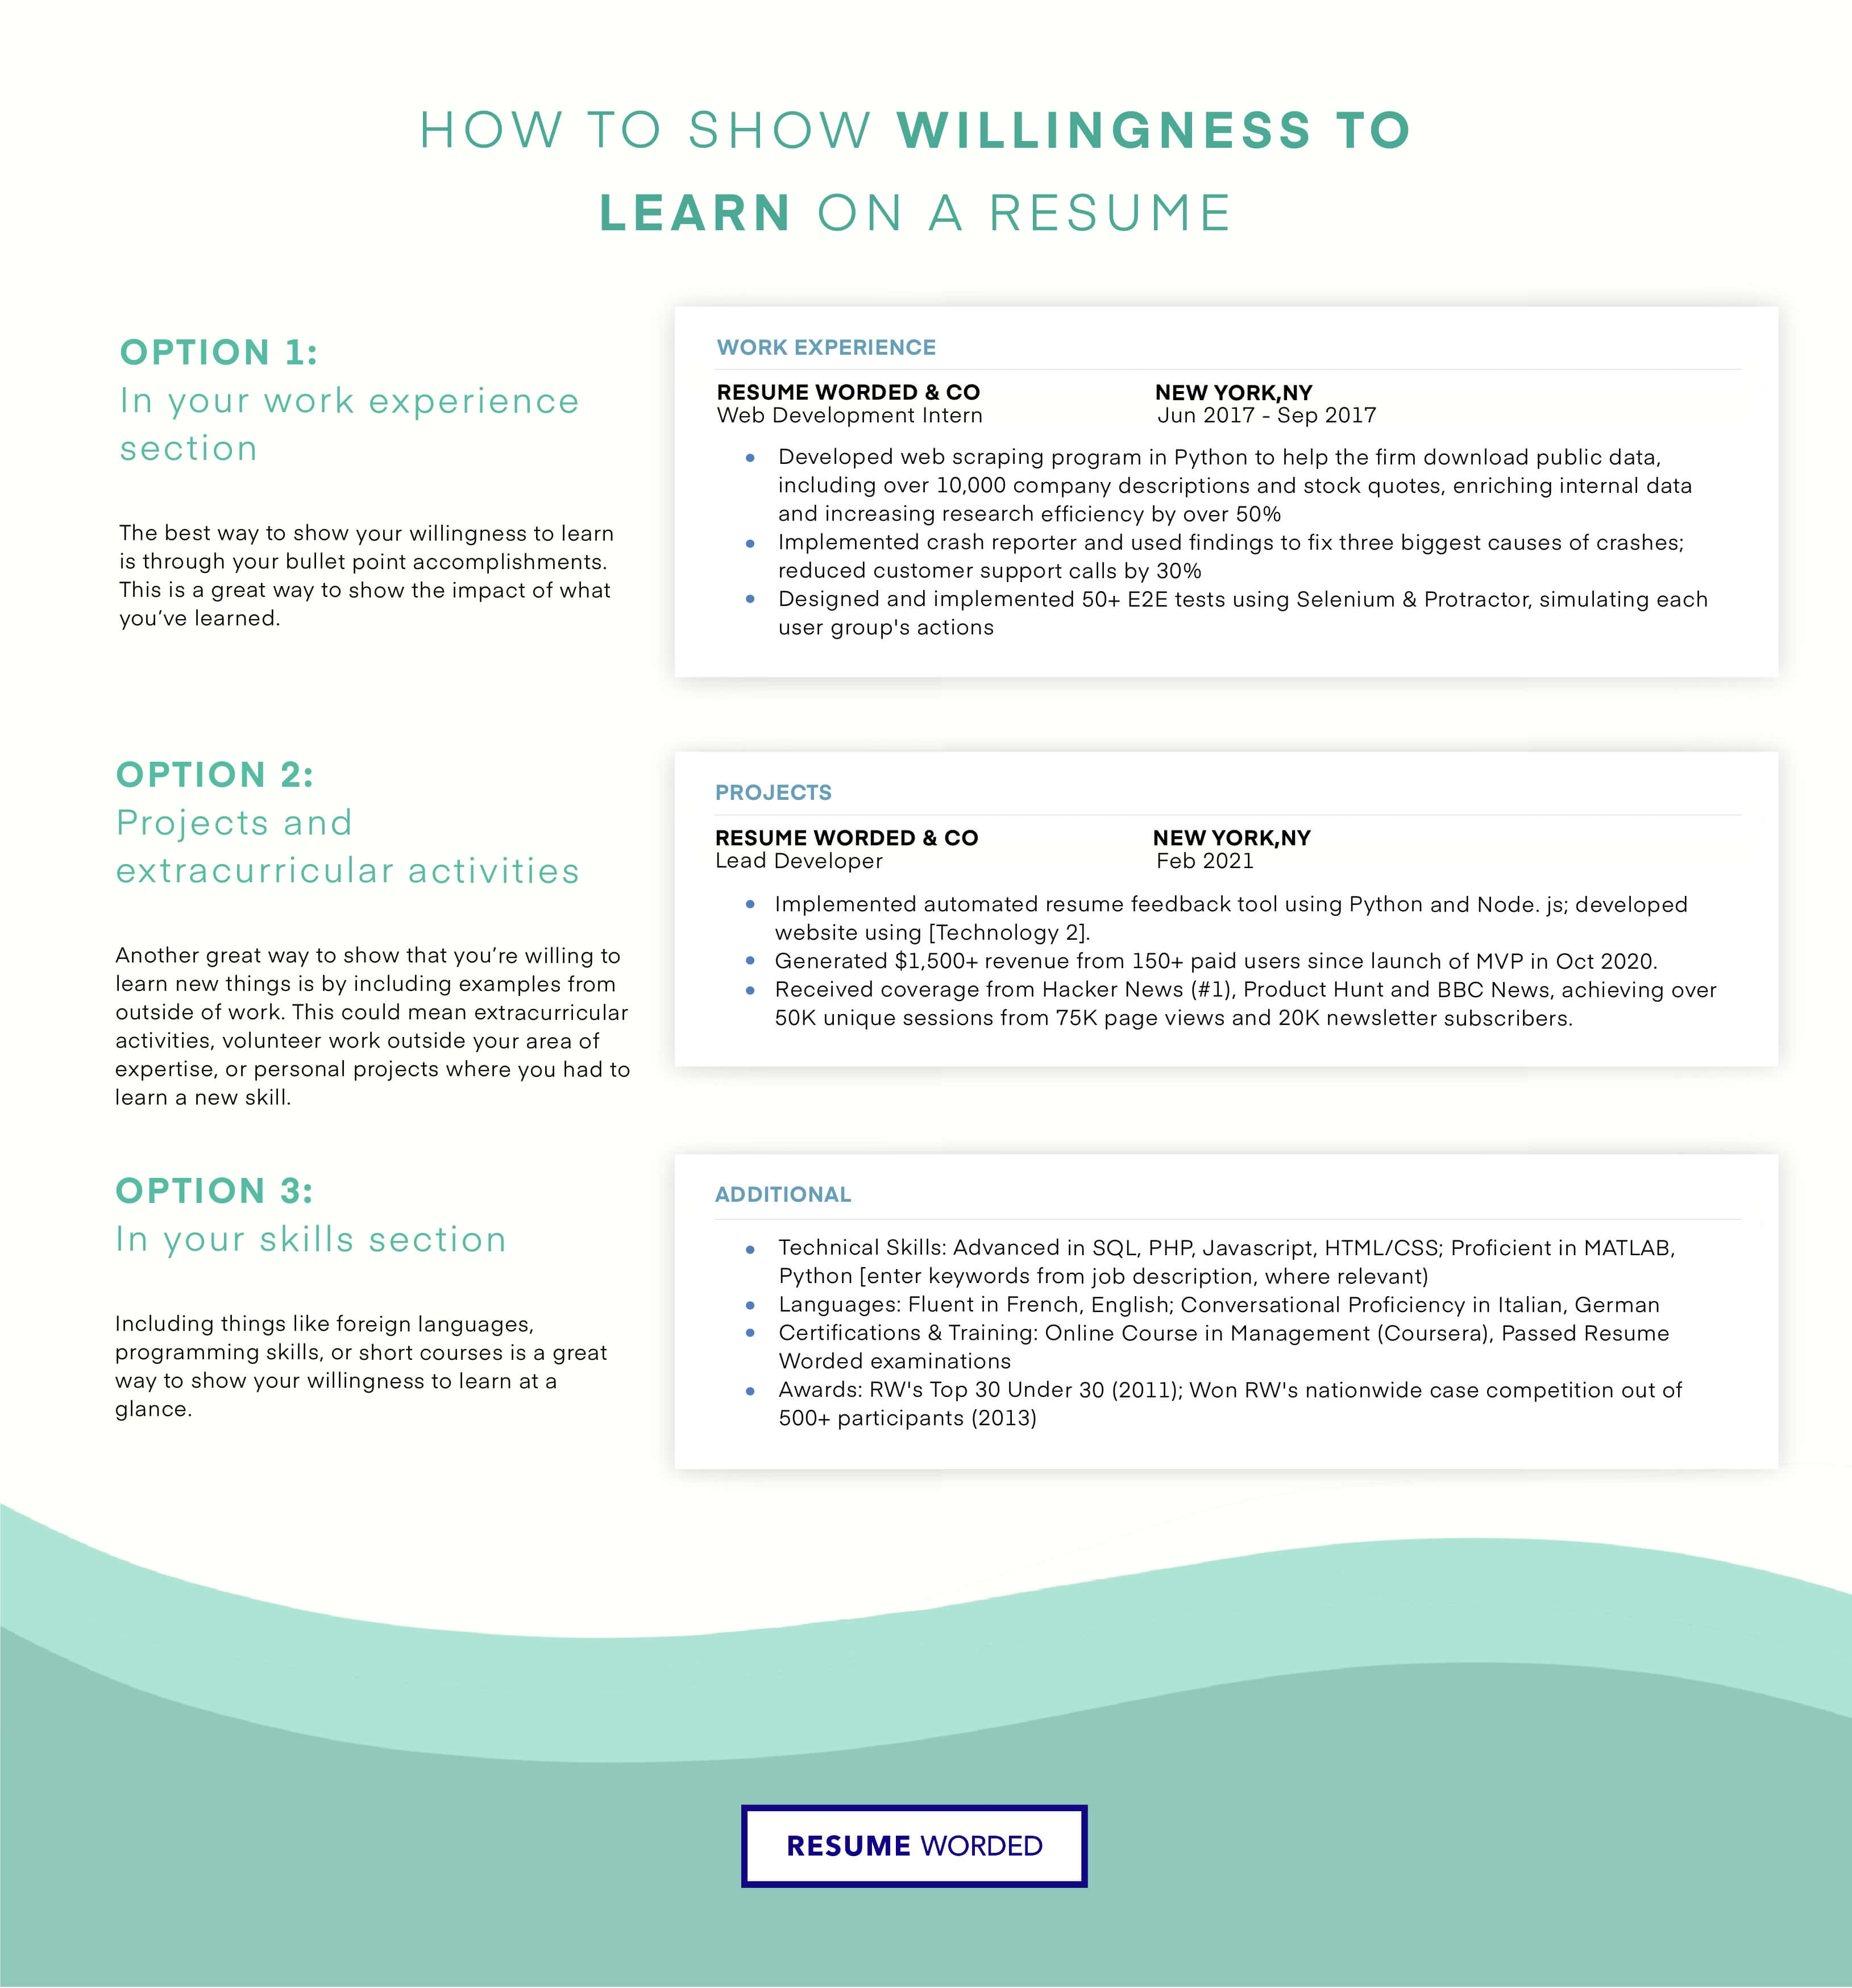 How To Demonstrate Willingness To Learn on a Resume